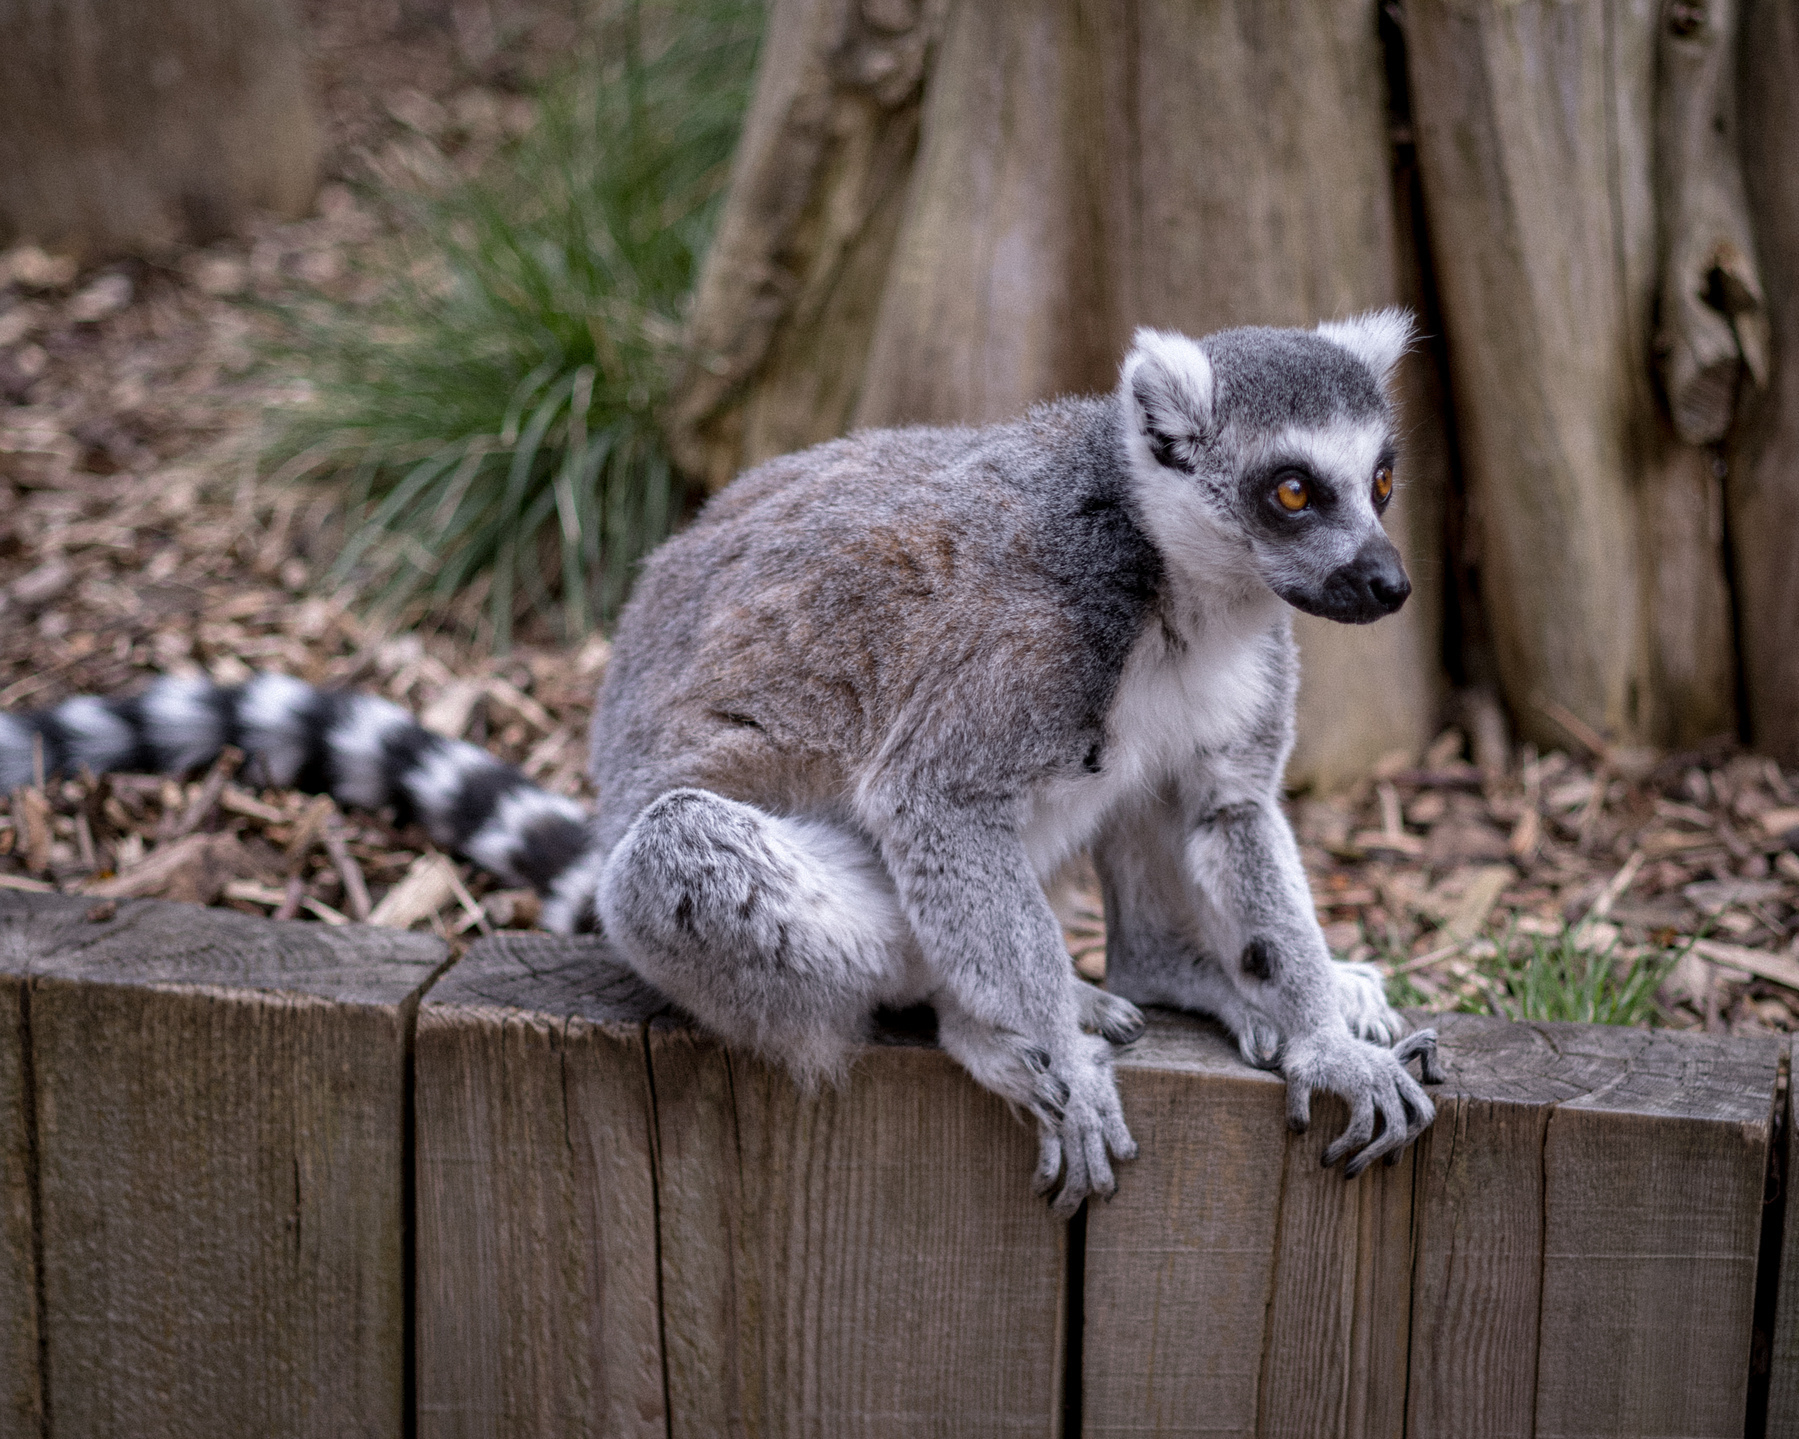 A close up shot of a lemur on a wall. The lemur is looking off to the right of the frame at a 30ish degree angle so you can just see both eyes.